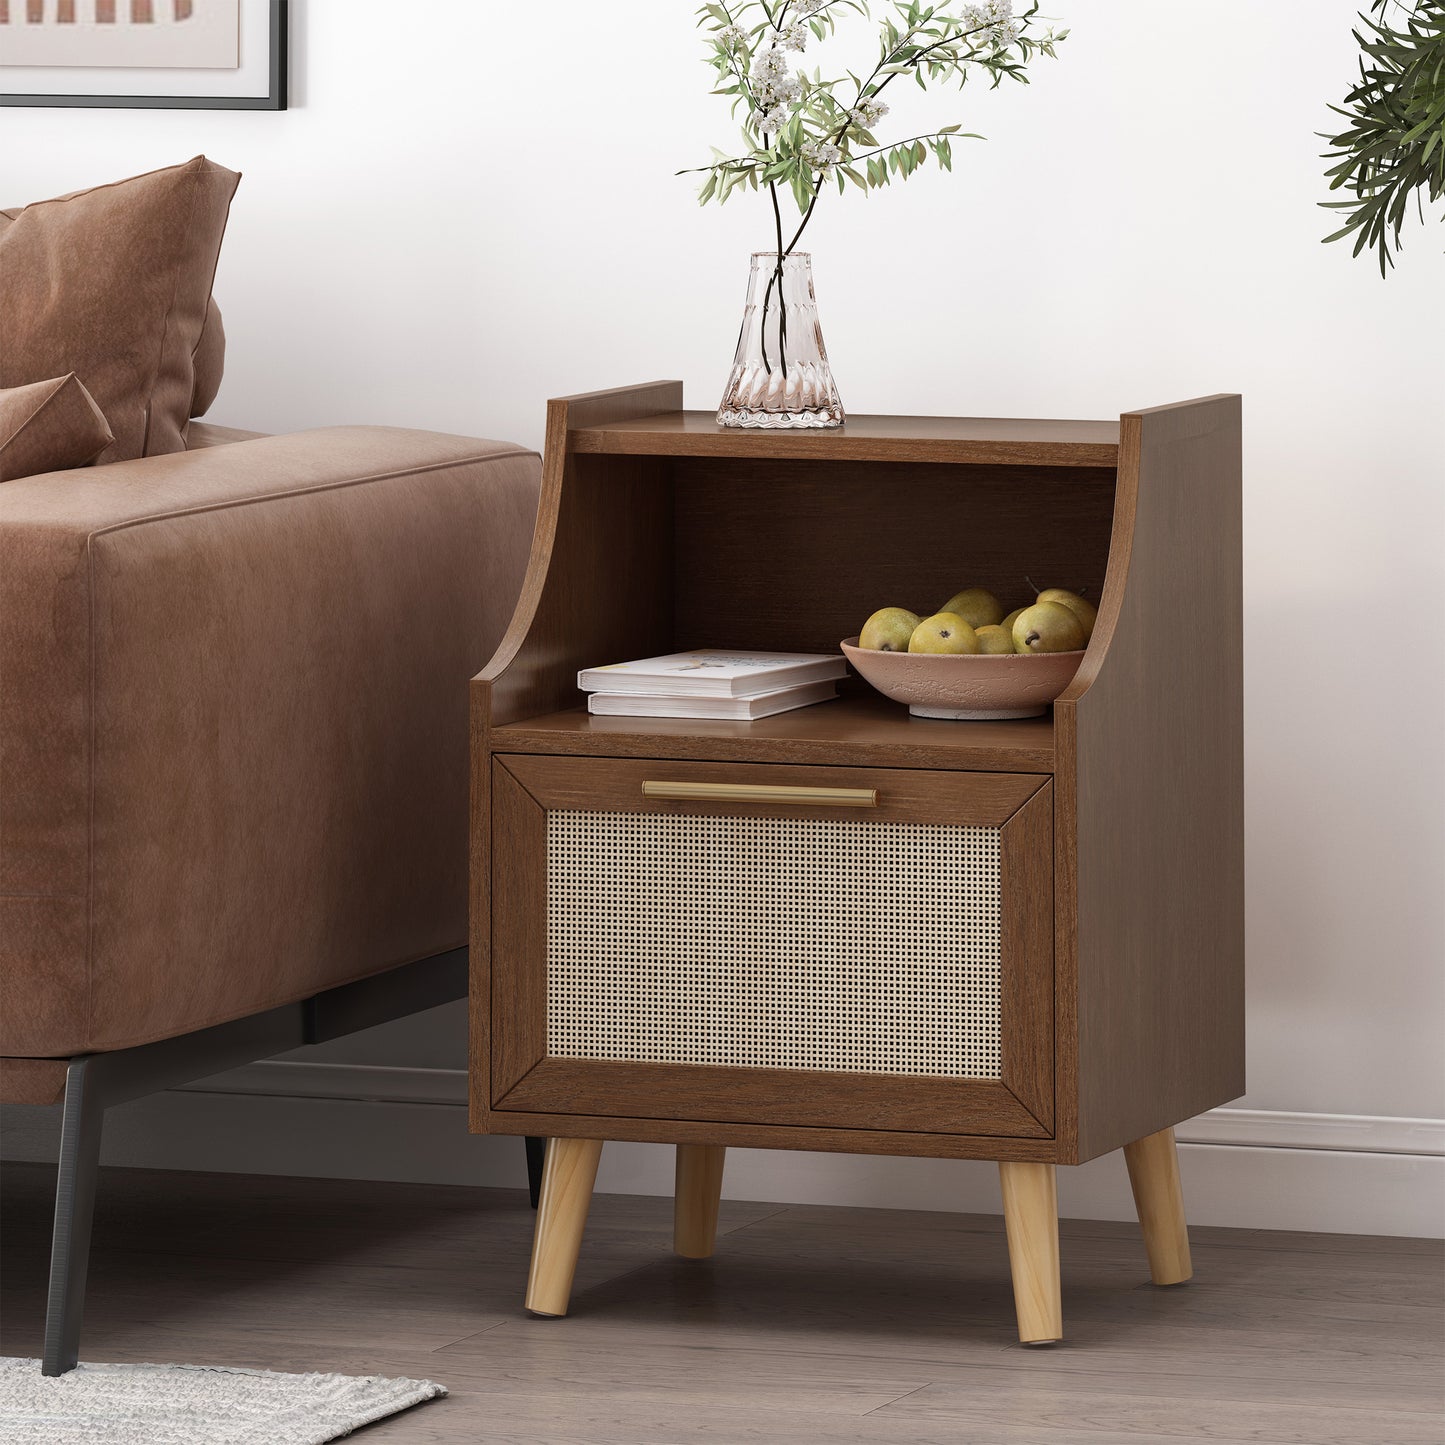 Hulett Contemporary End Table with Hutch, Walnut, Natural, and Antique Gold